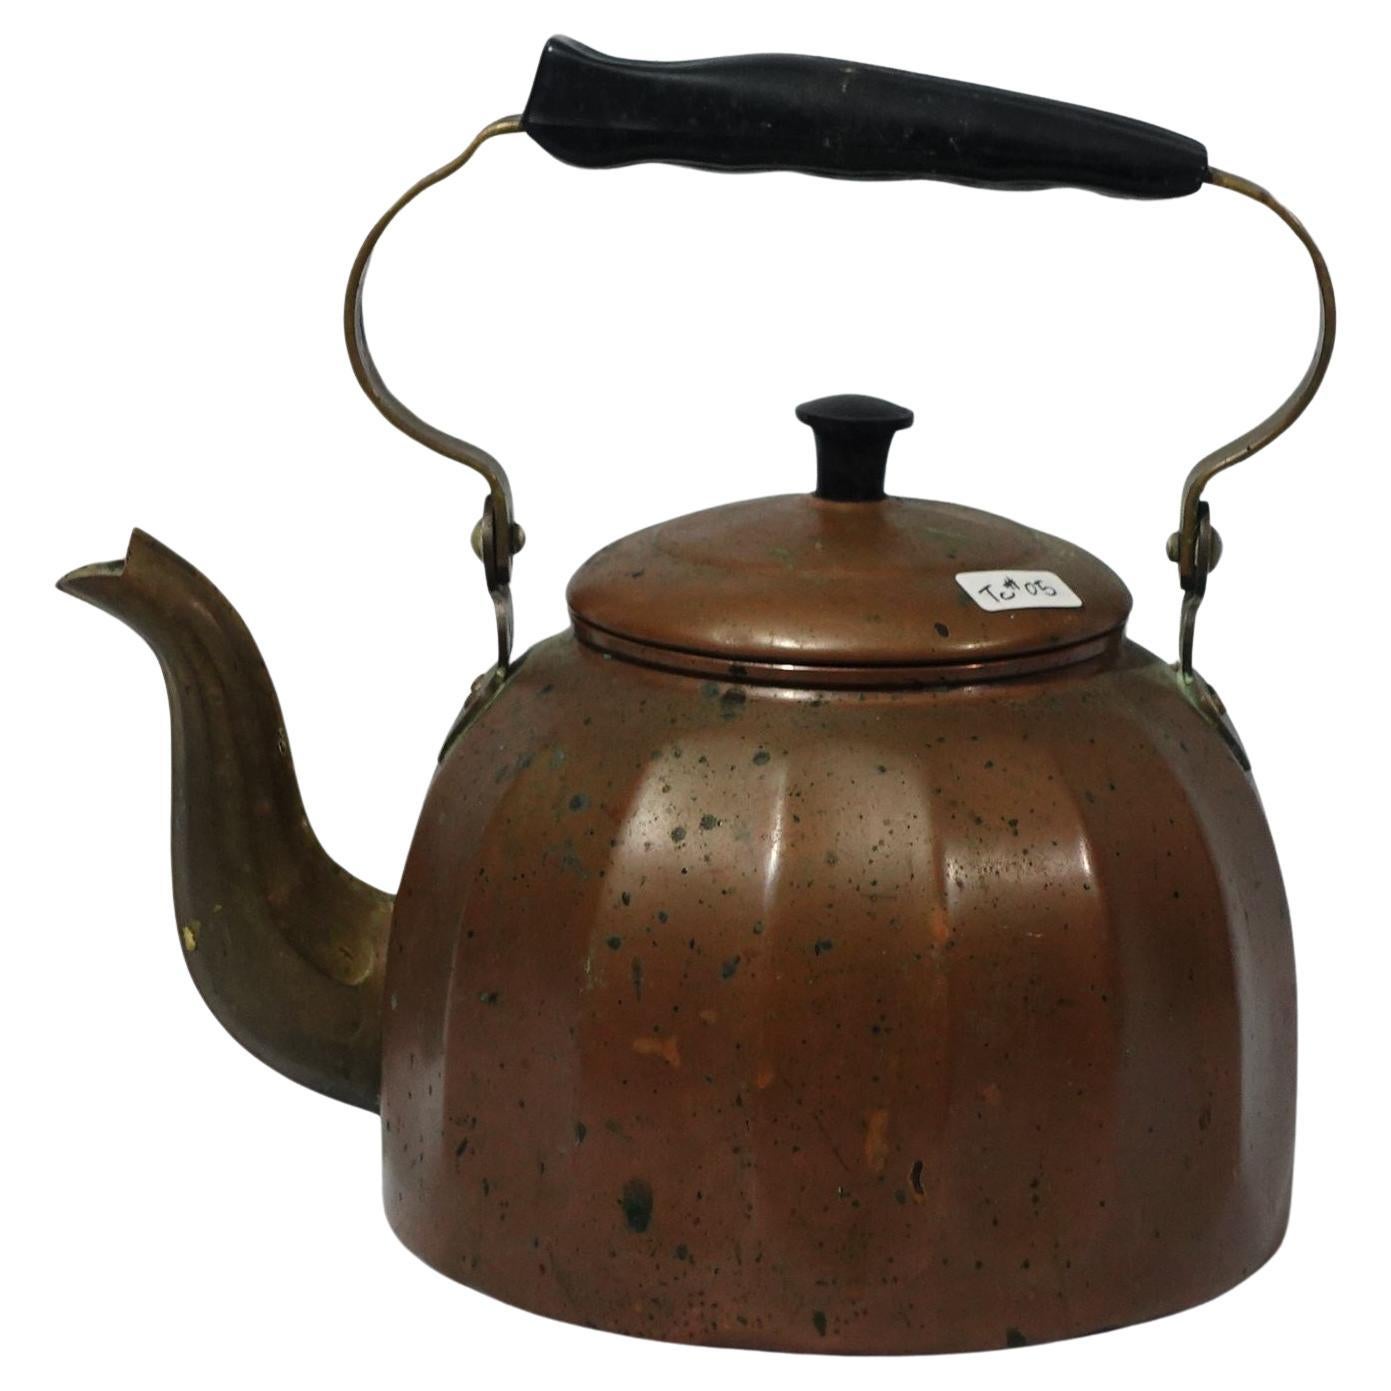 Antique A English Shaped Copper Tea Kettle "Made in Germany", TC#05 For Sale